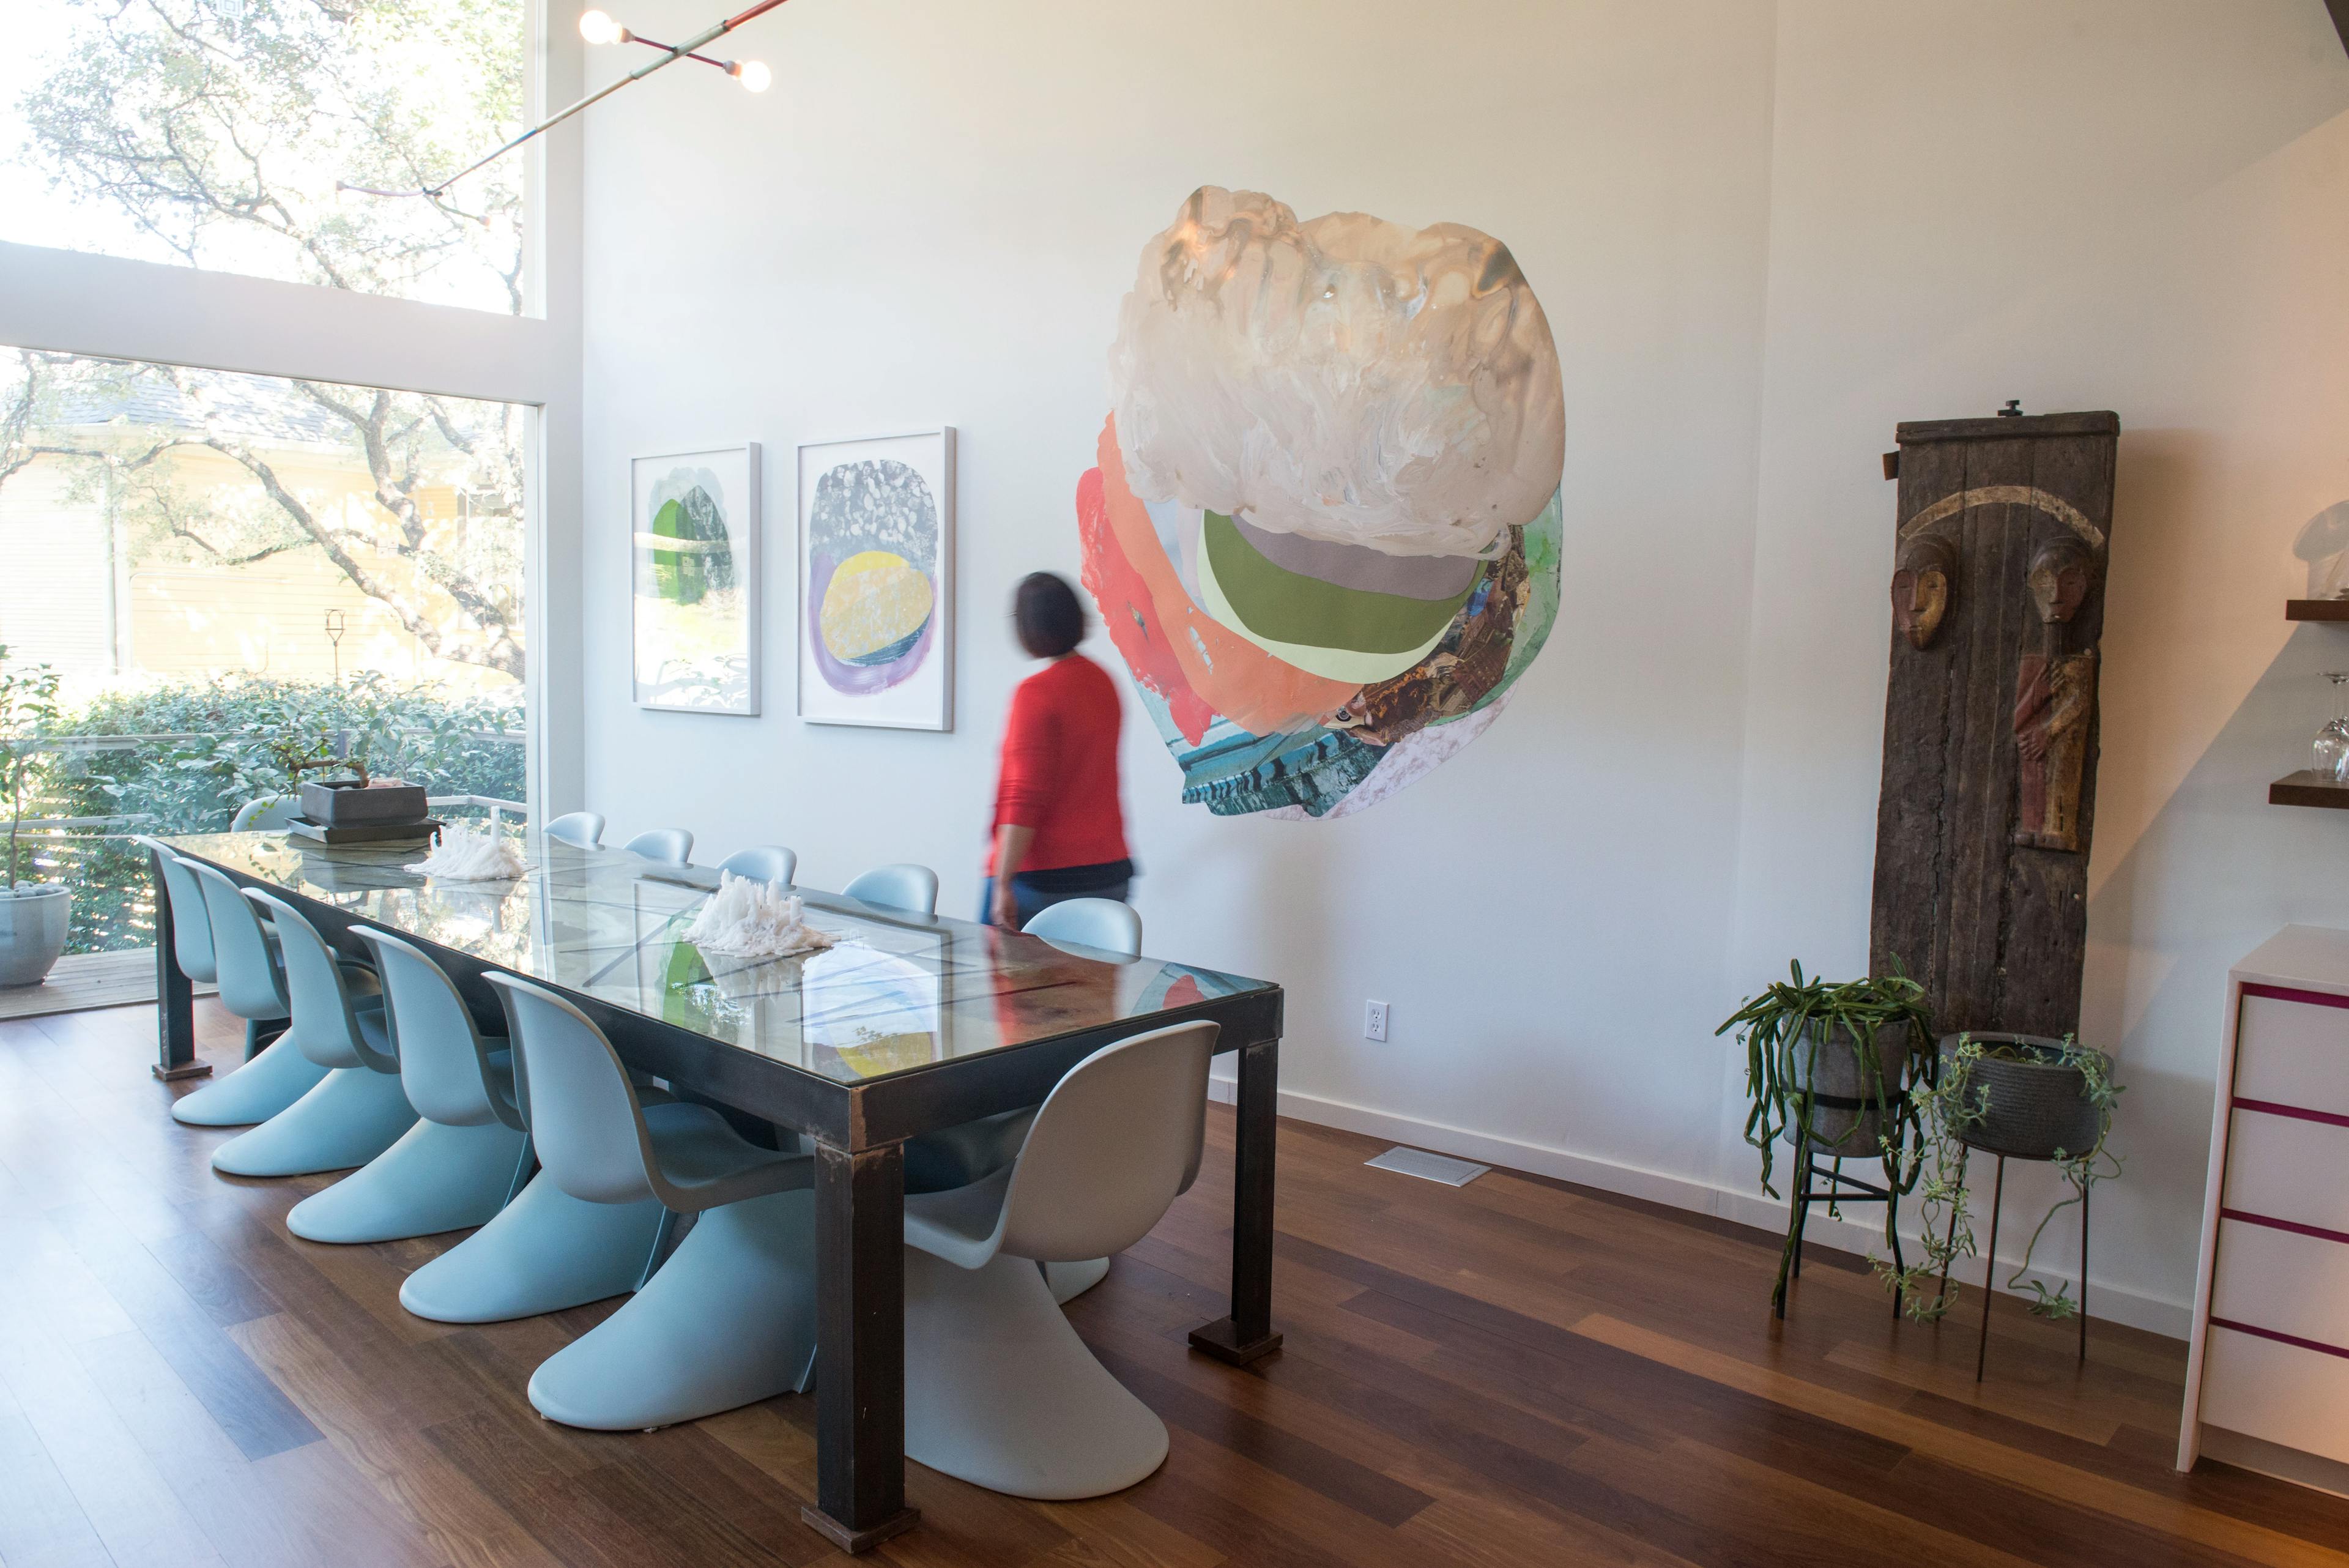 Three original collages by artist Xochi Solis, two framed and one large site-specific work, installed on a white wall in a dining room with a long glass table and blue chairs.